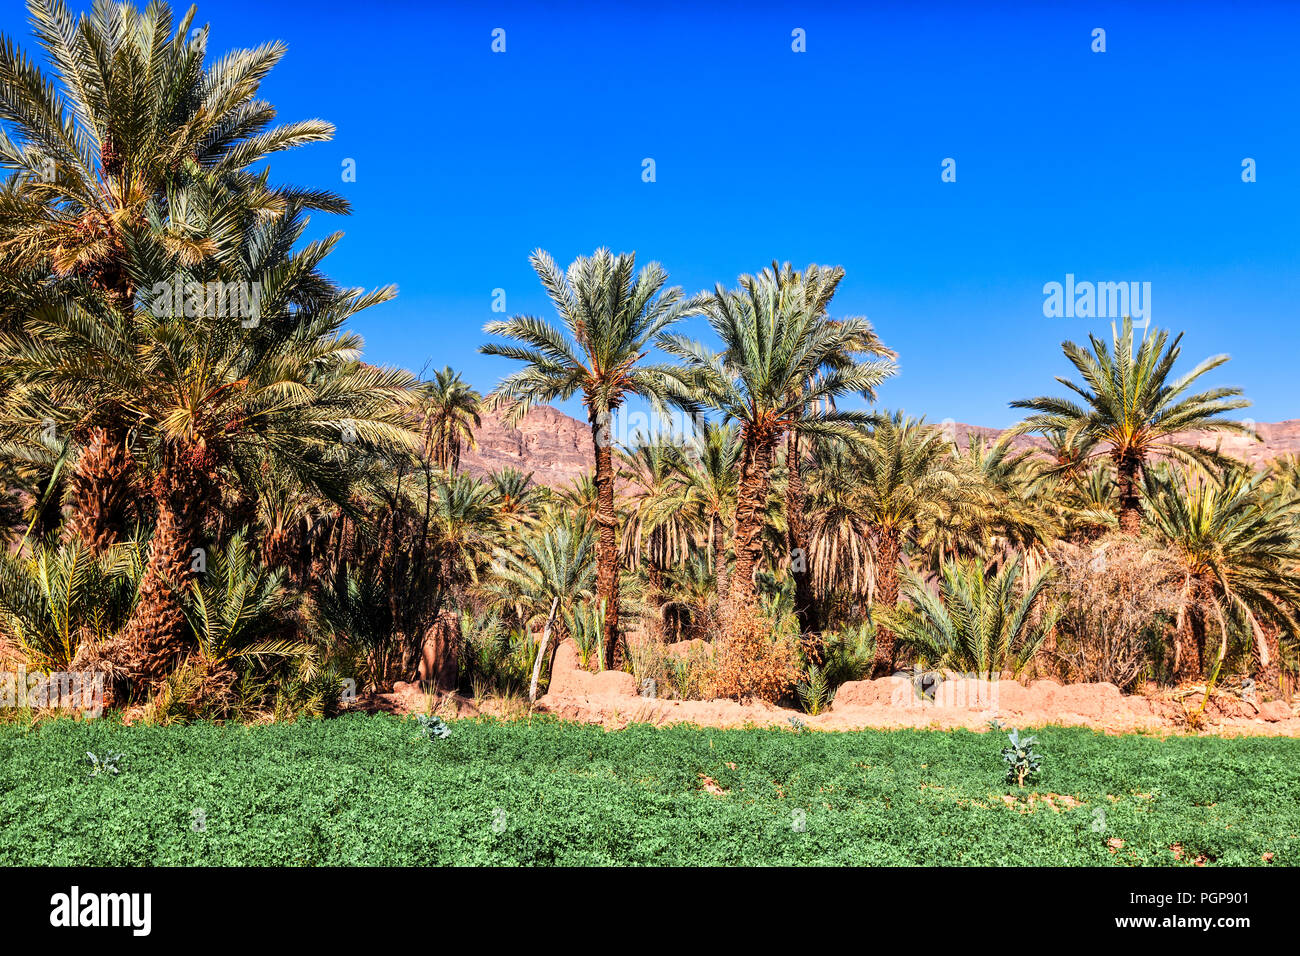 Morocco inside a date palm desert oasis. Bright blue sky. Copy space. Location: Draa Valley Stock Photo